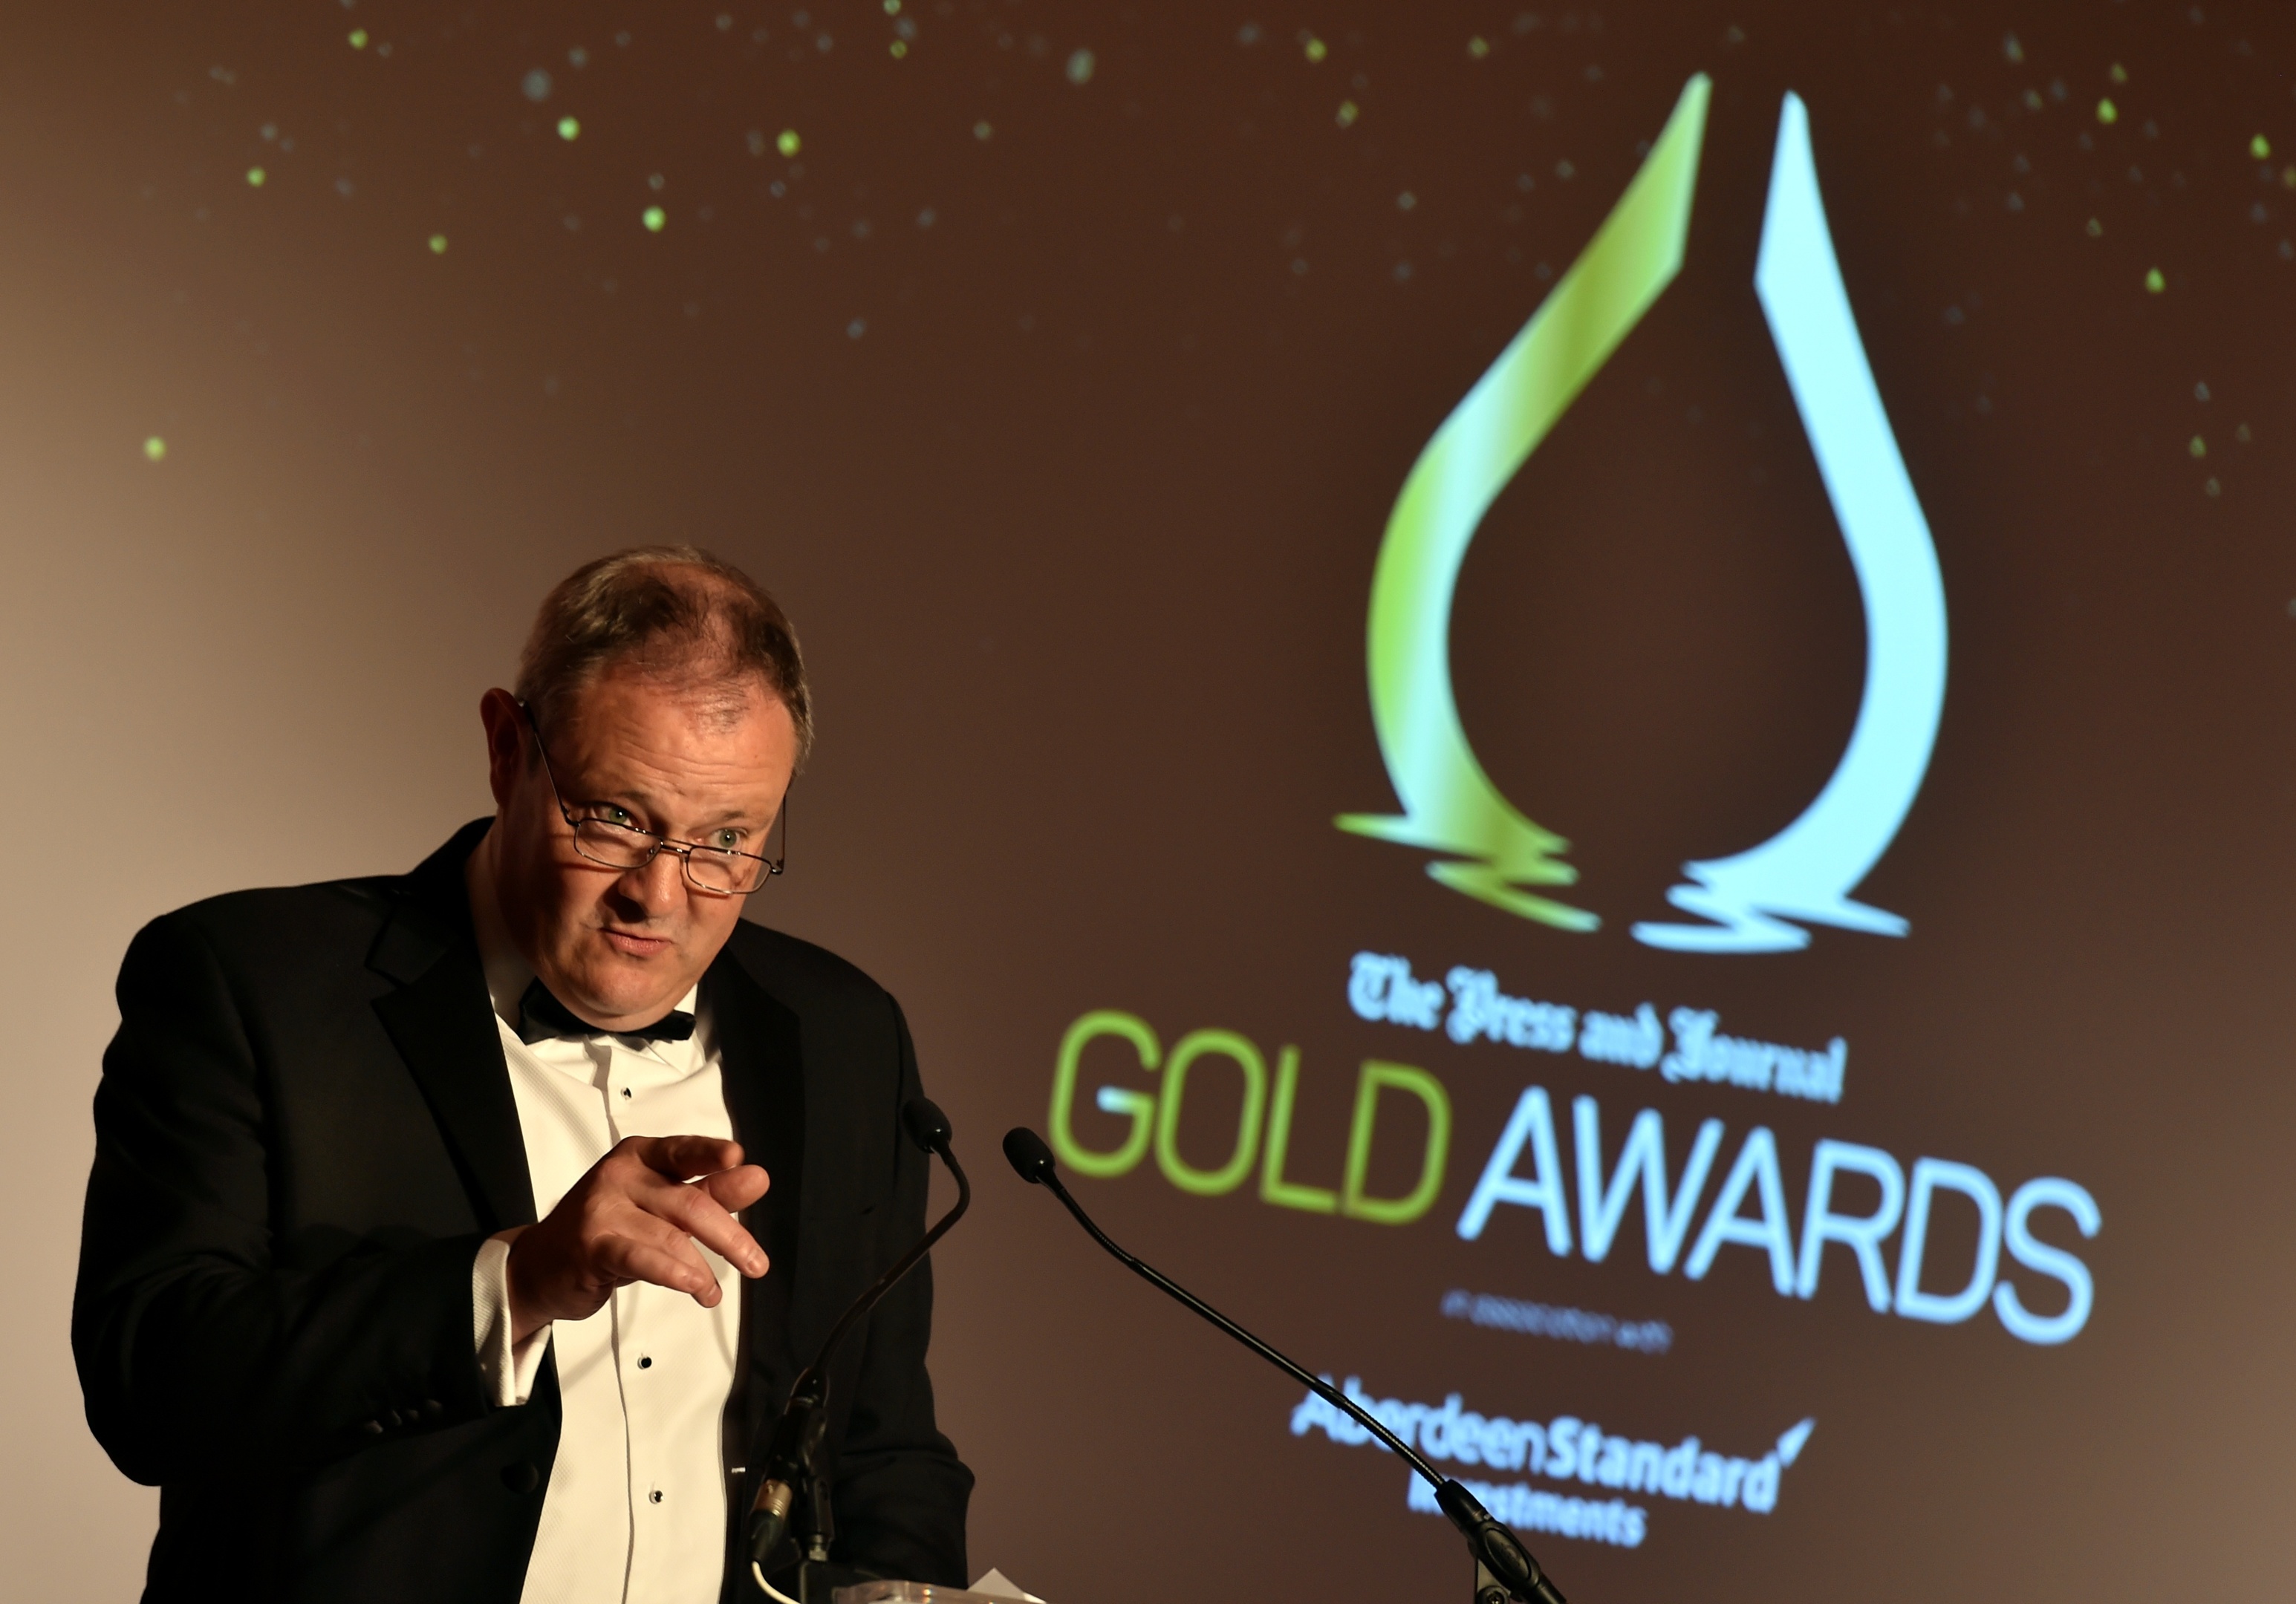 Gold awards held at the Marcliffe Hotel and Spa, Aberdeen.
Richard Neville.
Picture by COLIN RENNIE September 8, 2017.